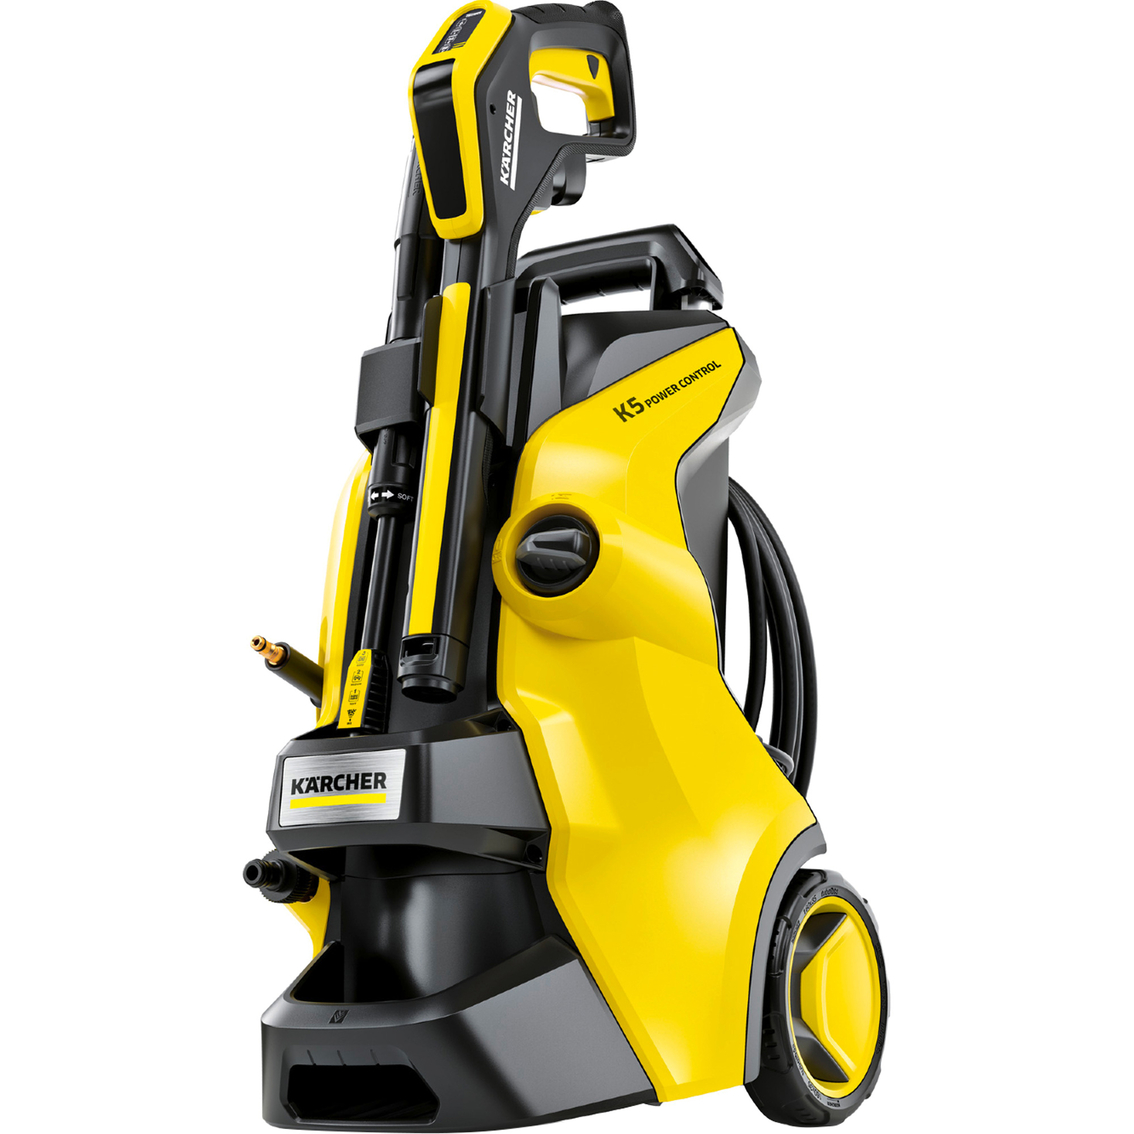 Karcher K5 Power Control 2000 PSI Electric Pressure Washer - Image 4 of 10